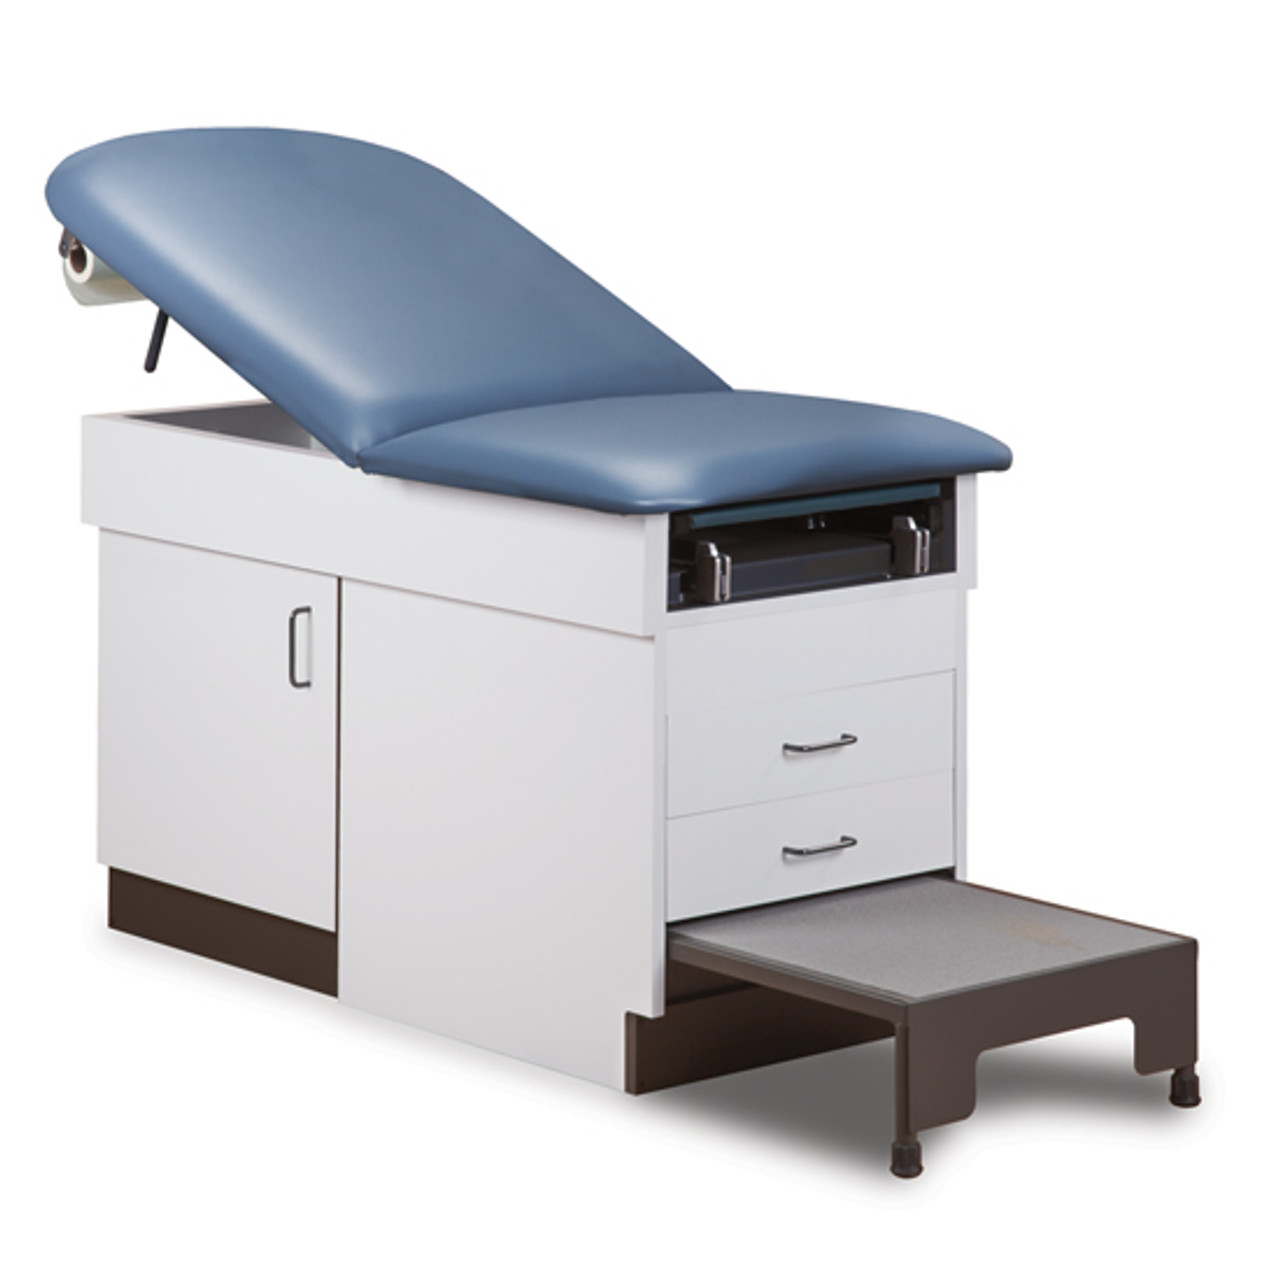 Family Practice Exam Table With Step Stool - QuickShip